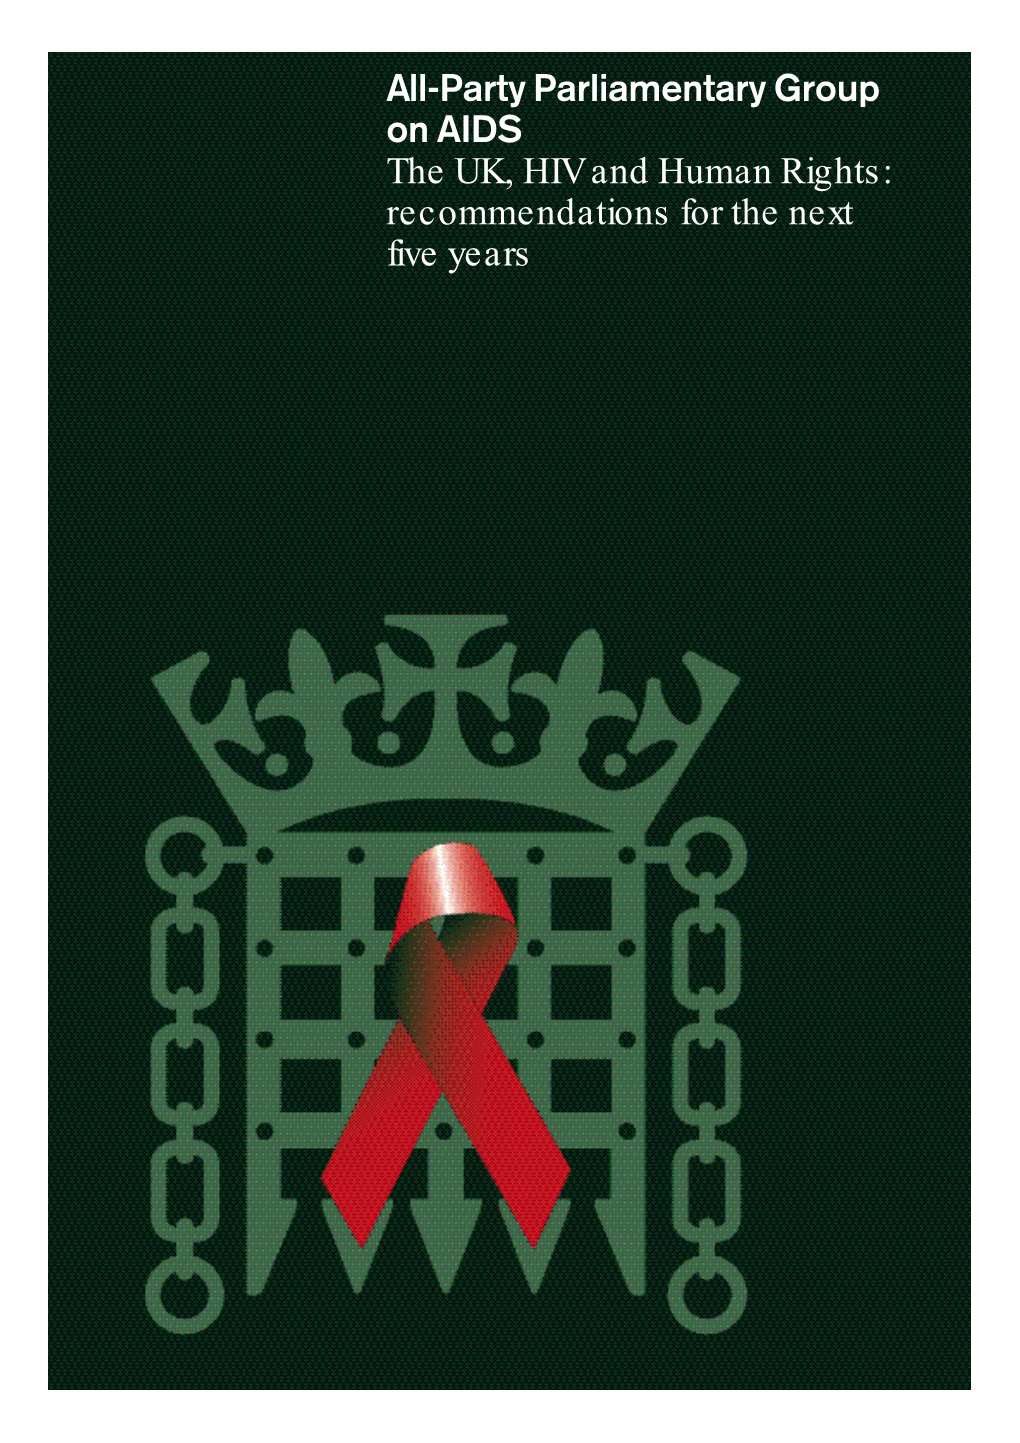 All-Party Parliamentary Group on AIDS